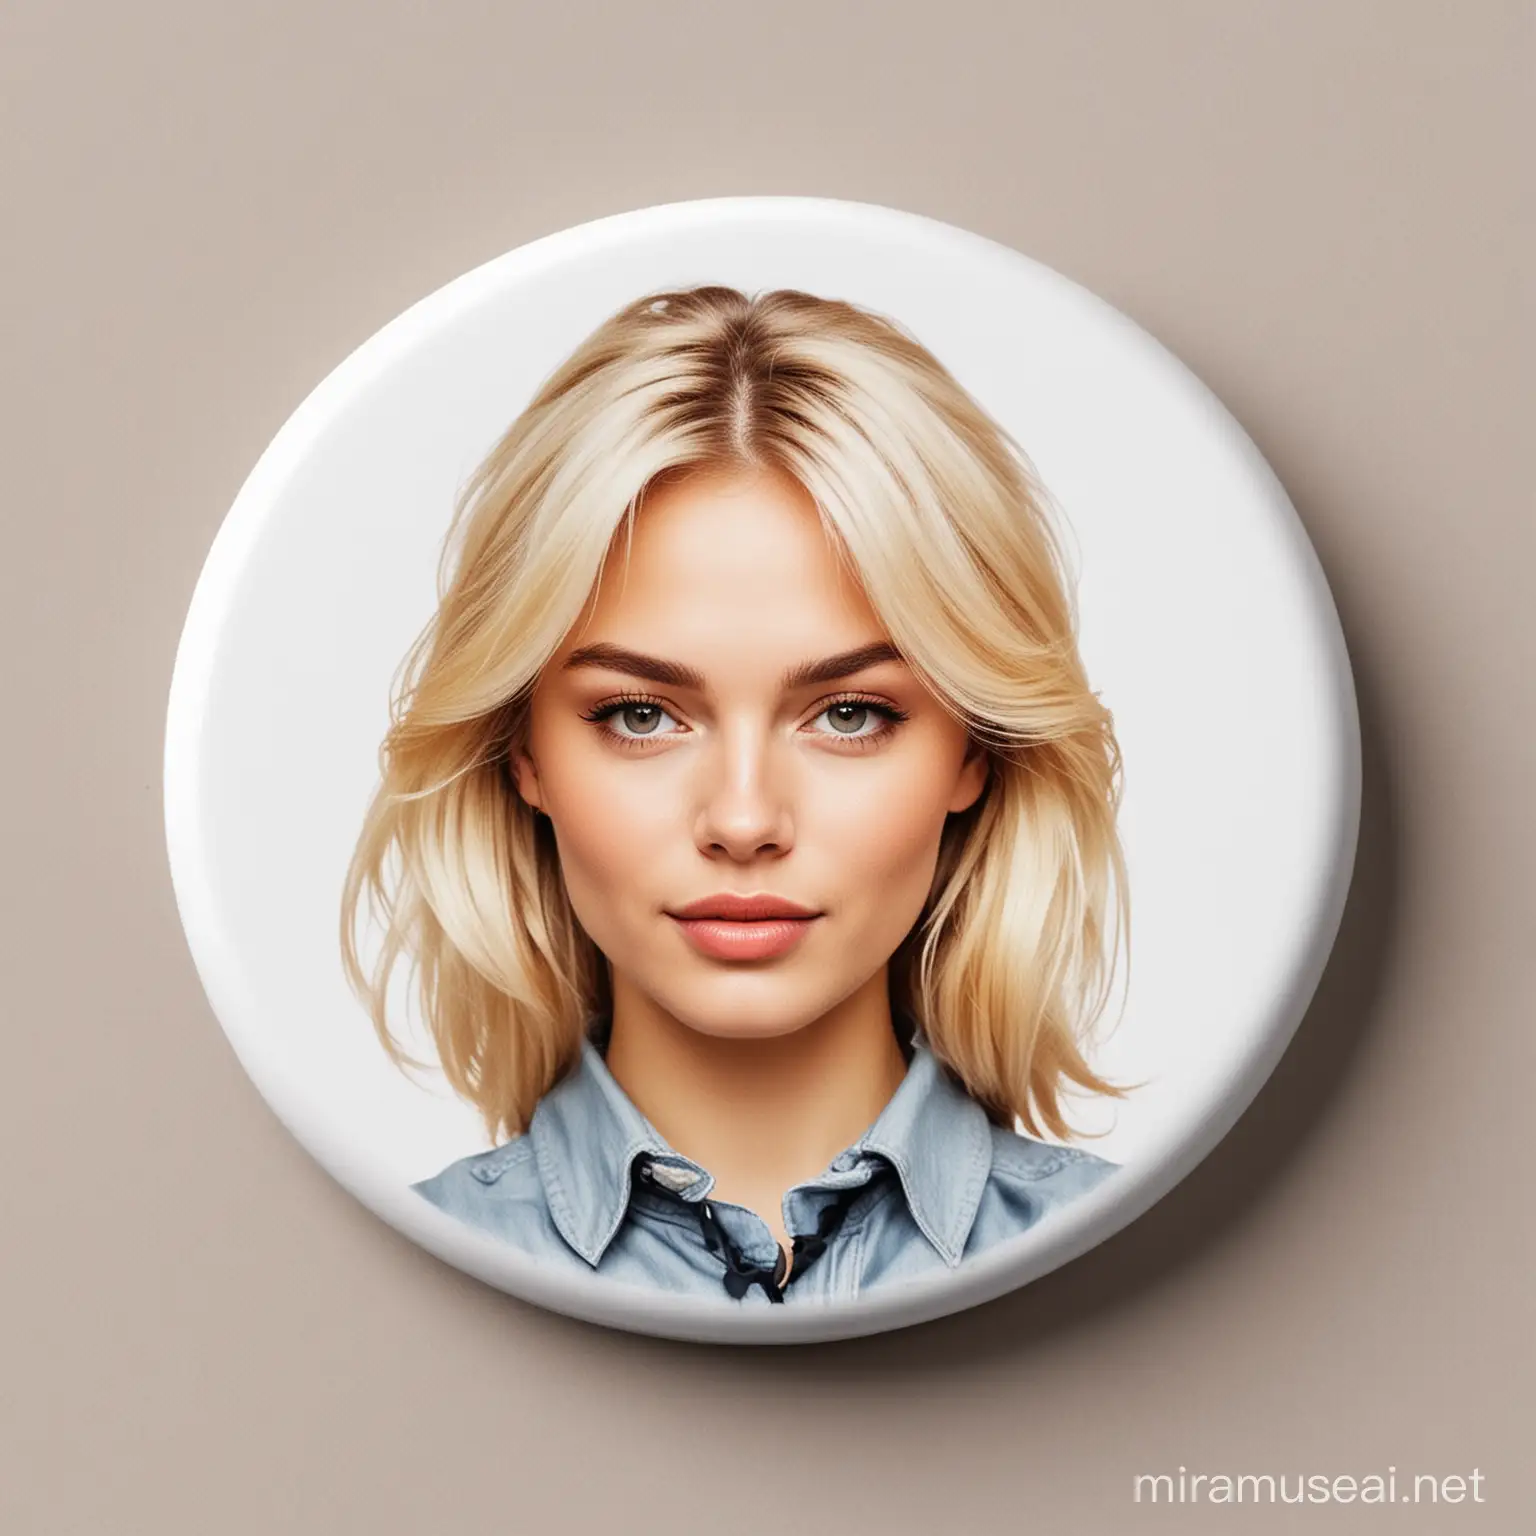 A circular badge with the head of a WOMEN on it Blonde and beautiful
